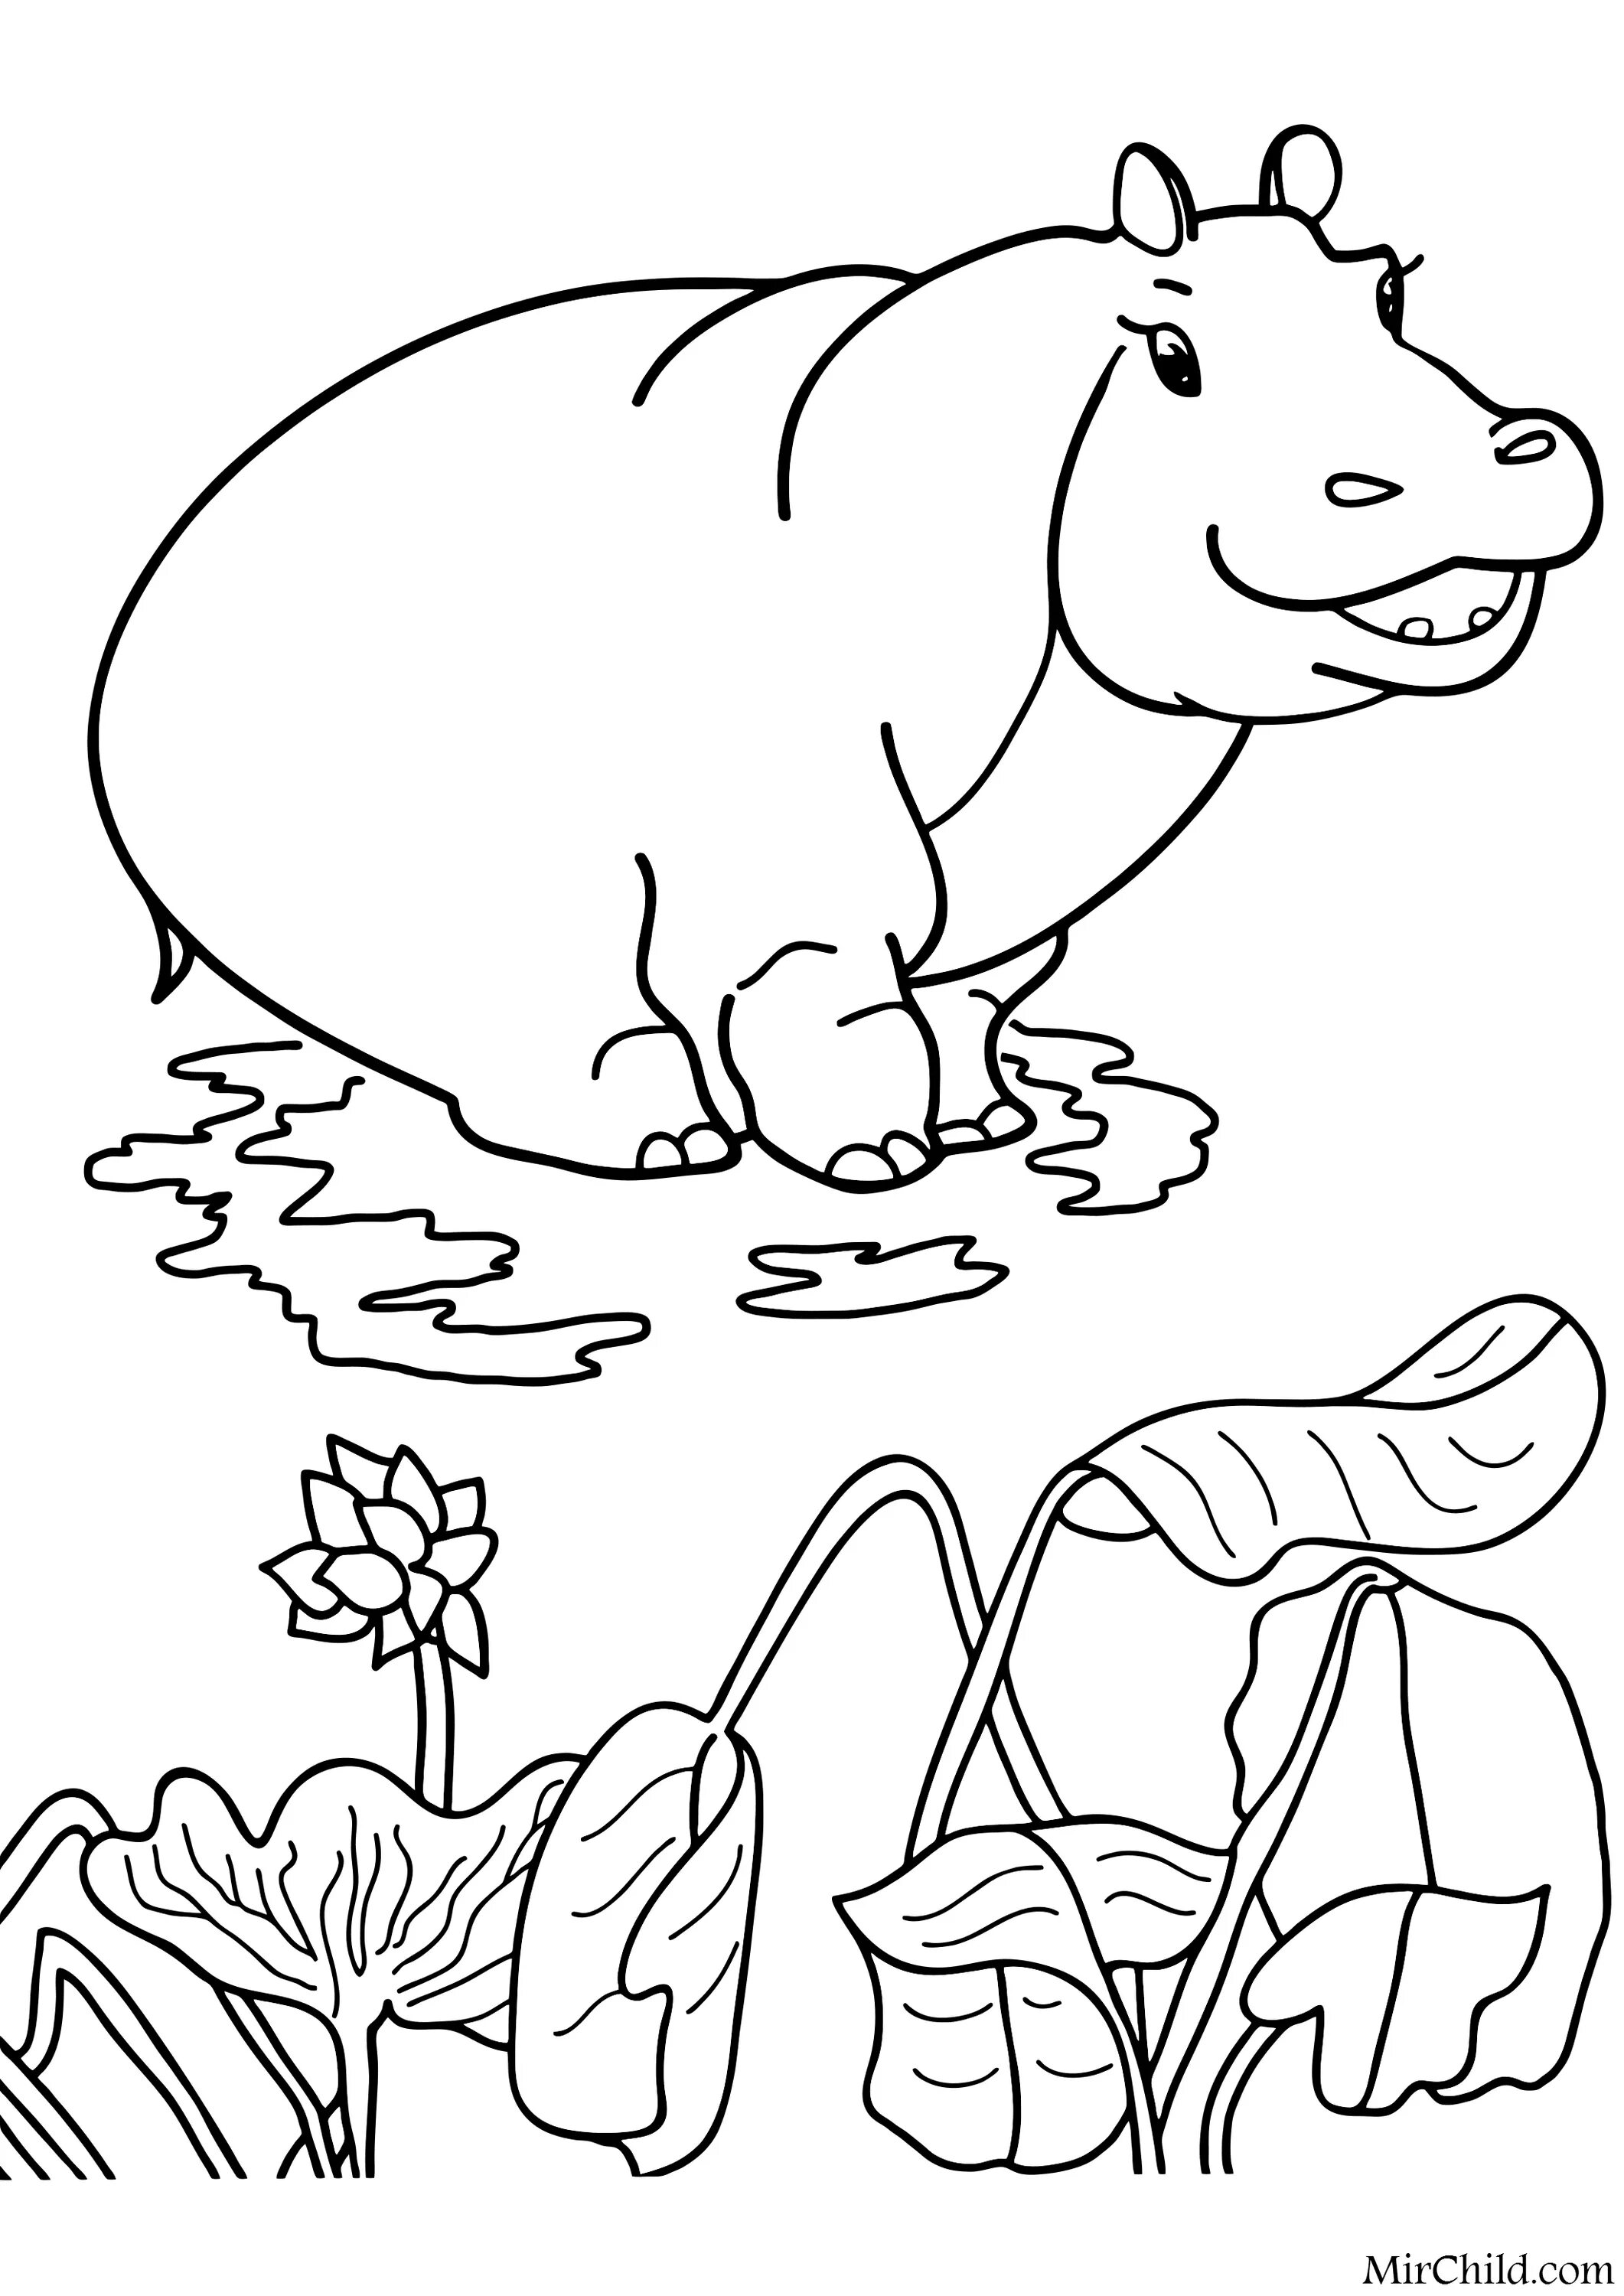 Unique mammoth coloring book for kids